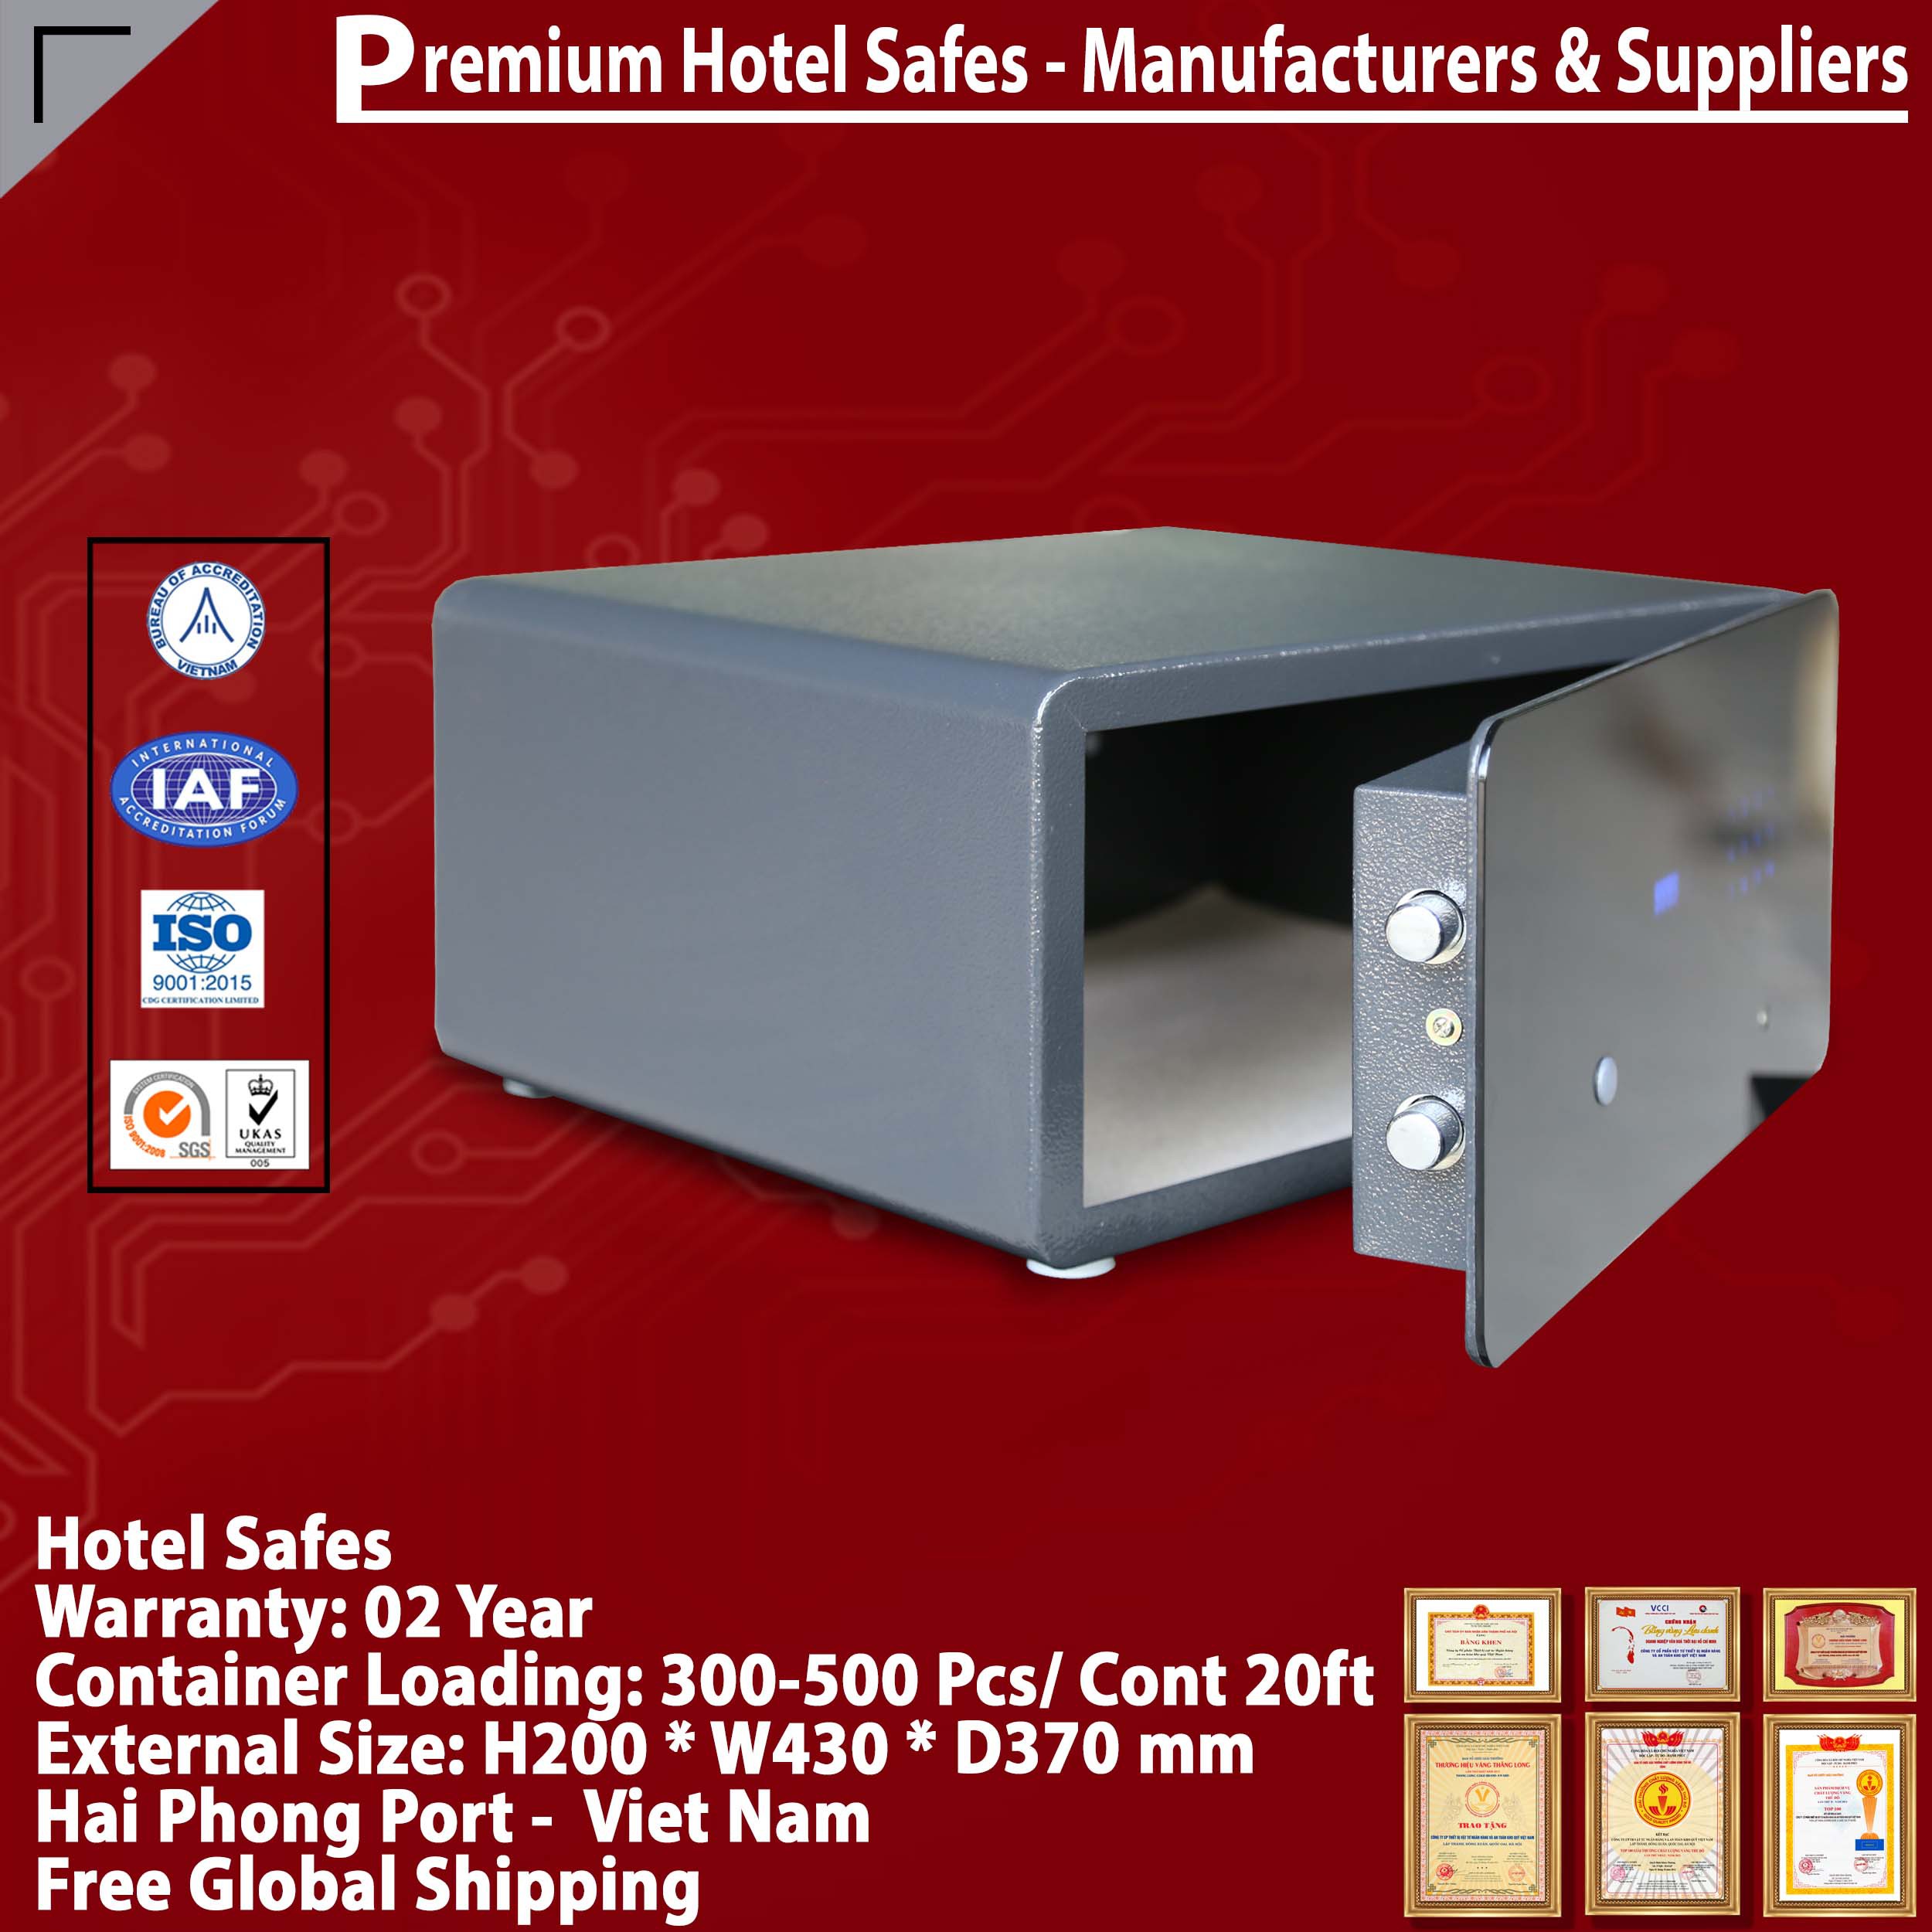 Best Sellers In Hotel Safes High Quality Price Ratio‎ WELKO